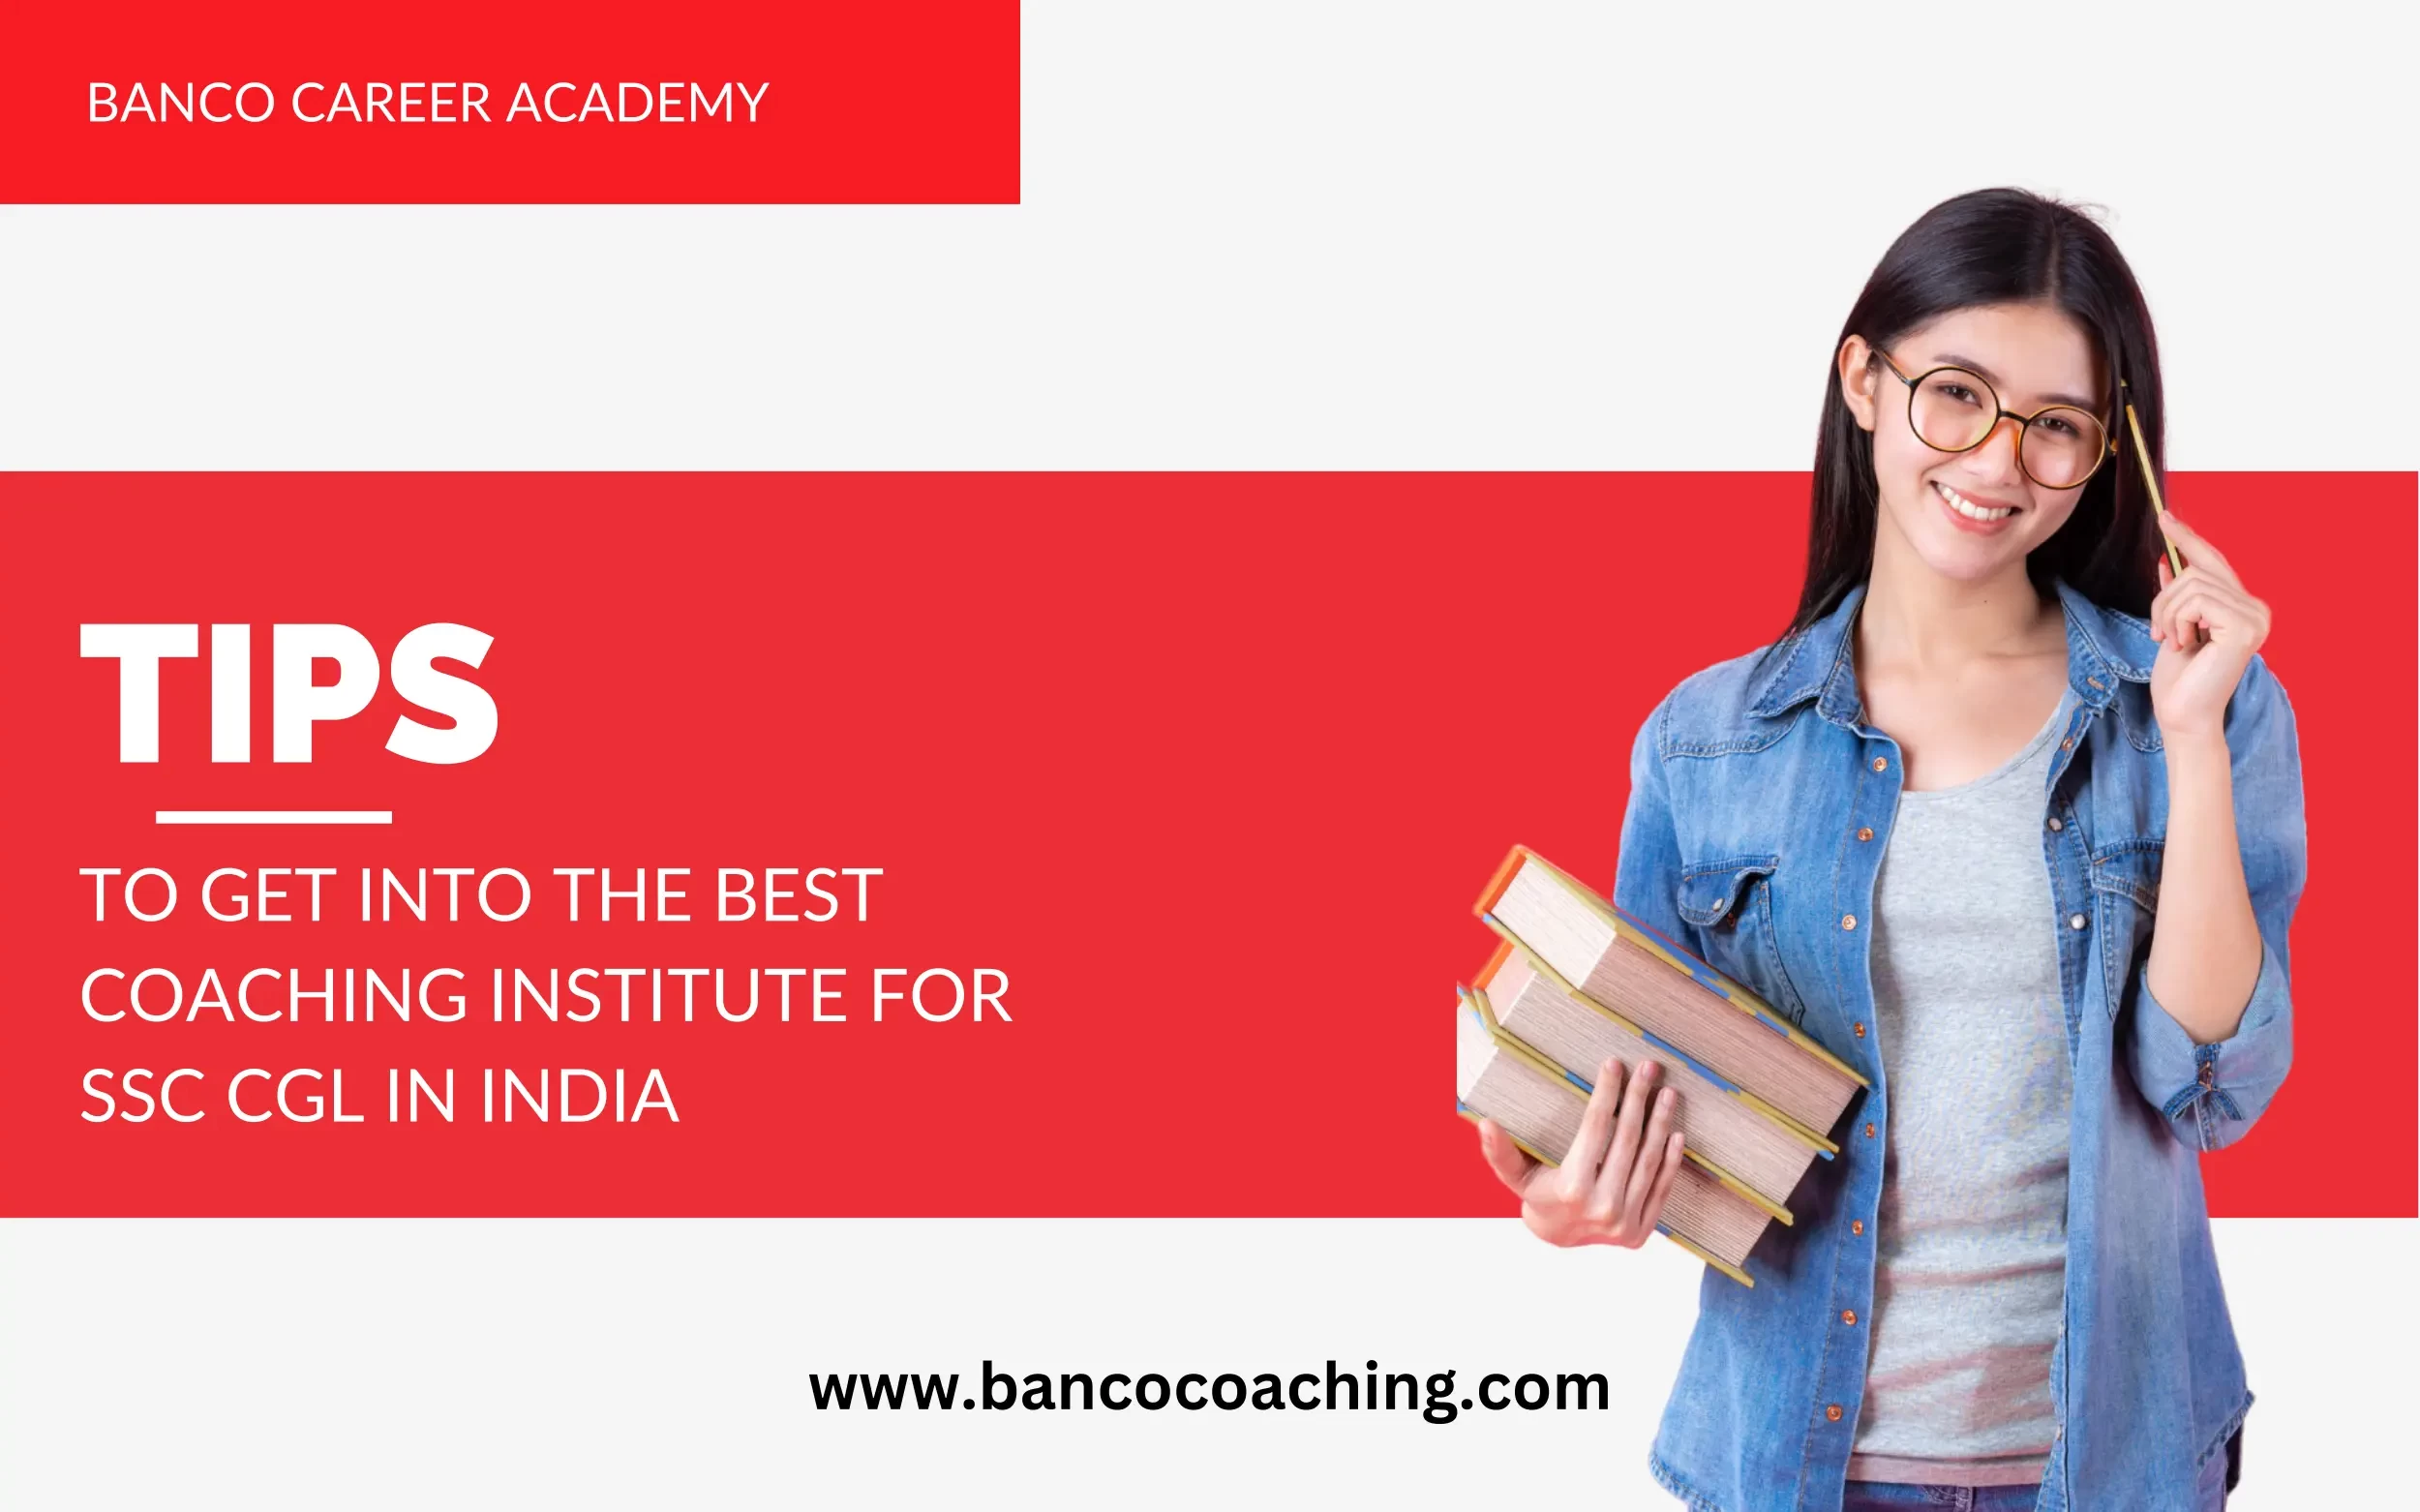 Tips to Get Into The Best Coaching Institute For SSC CGL In India